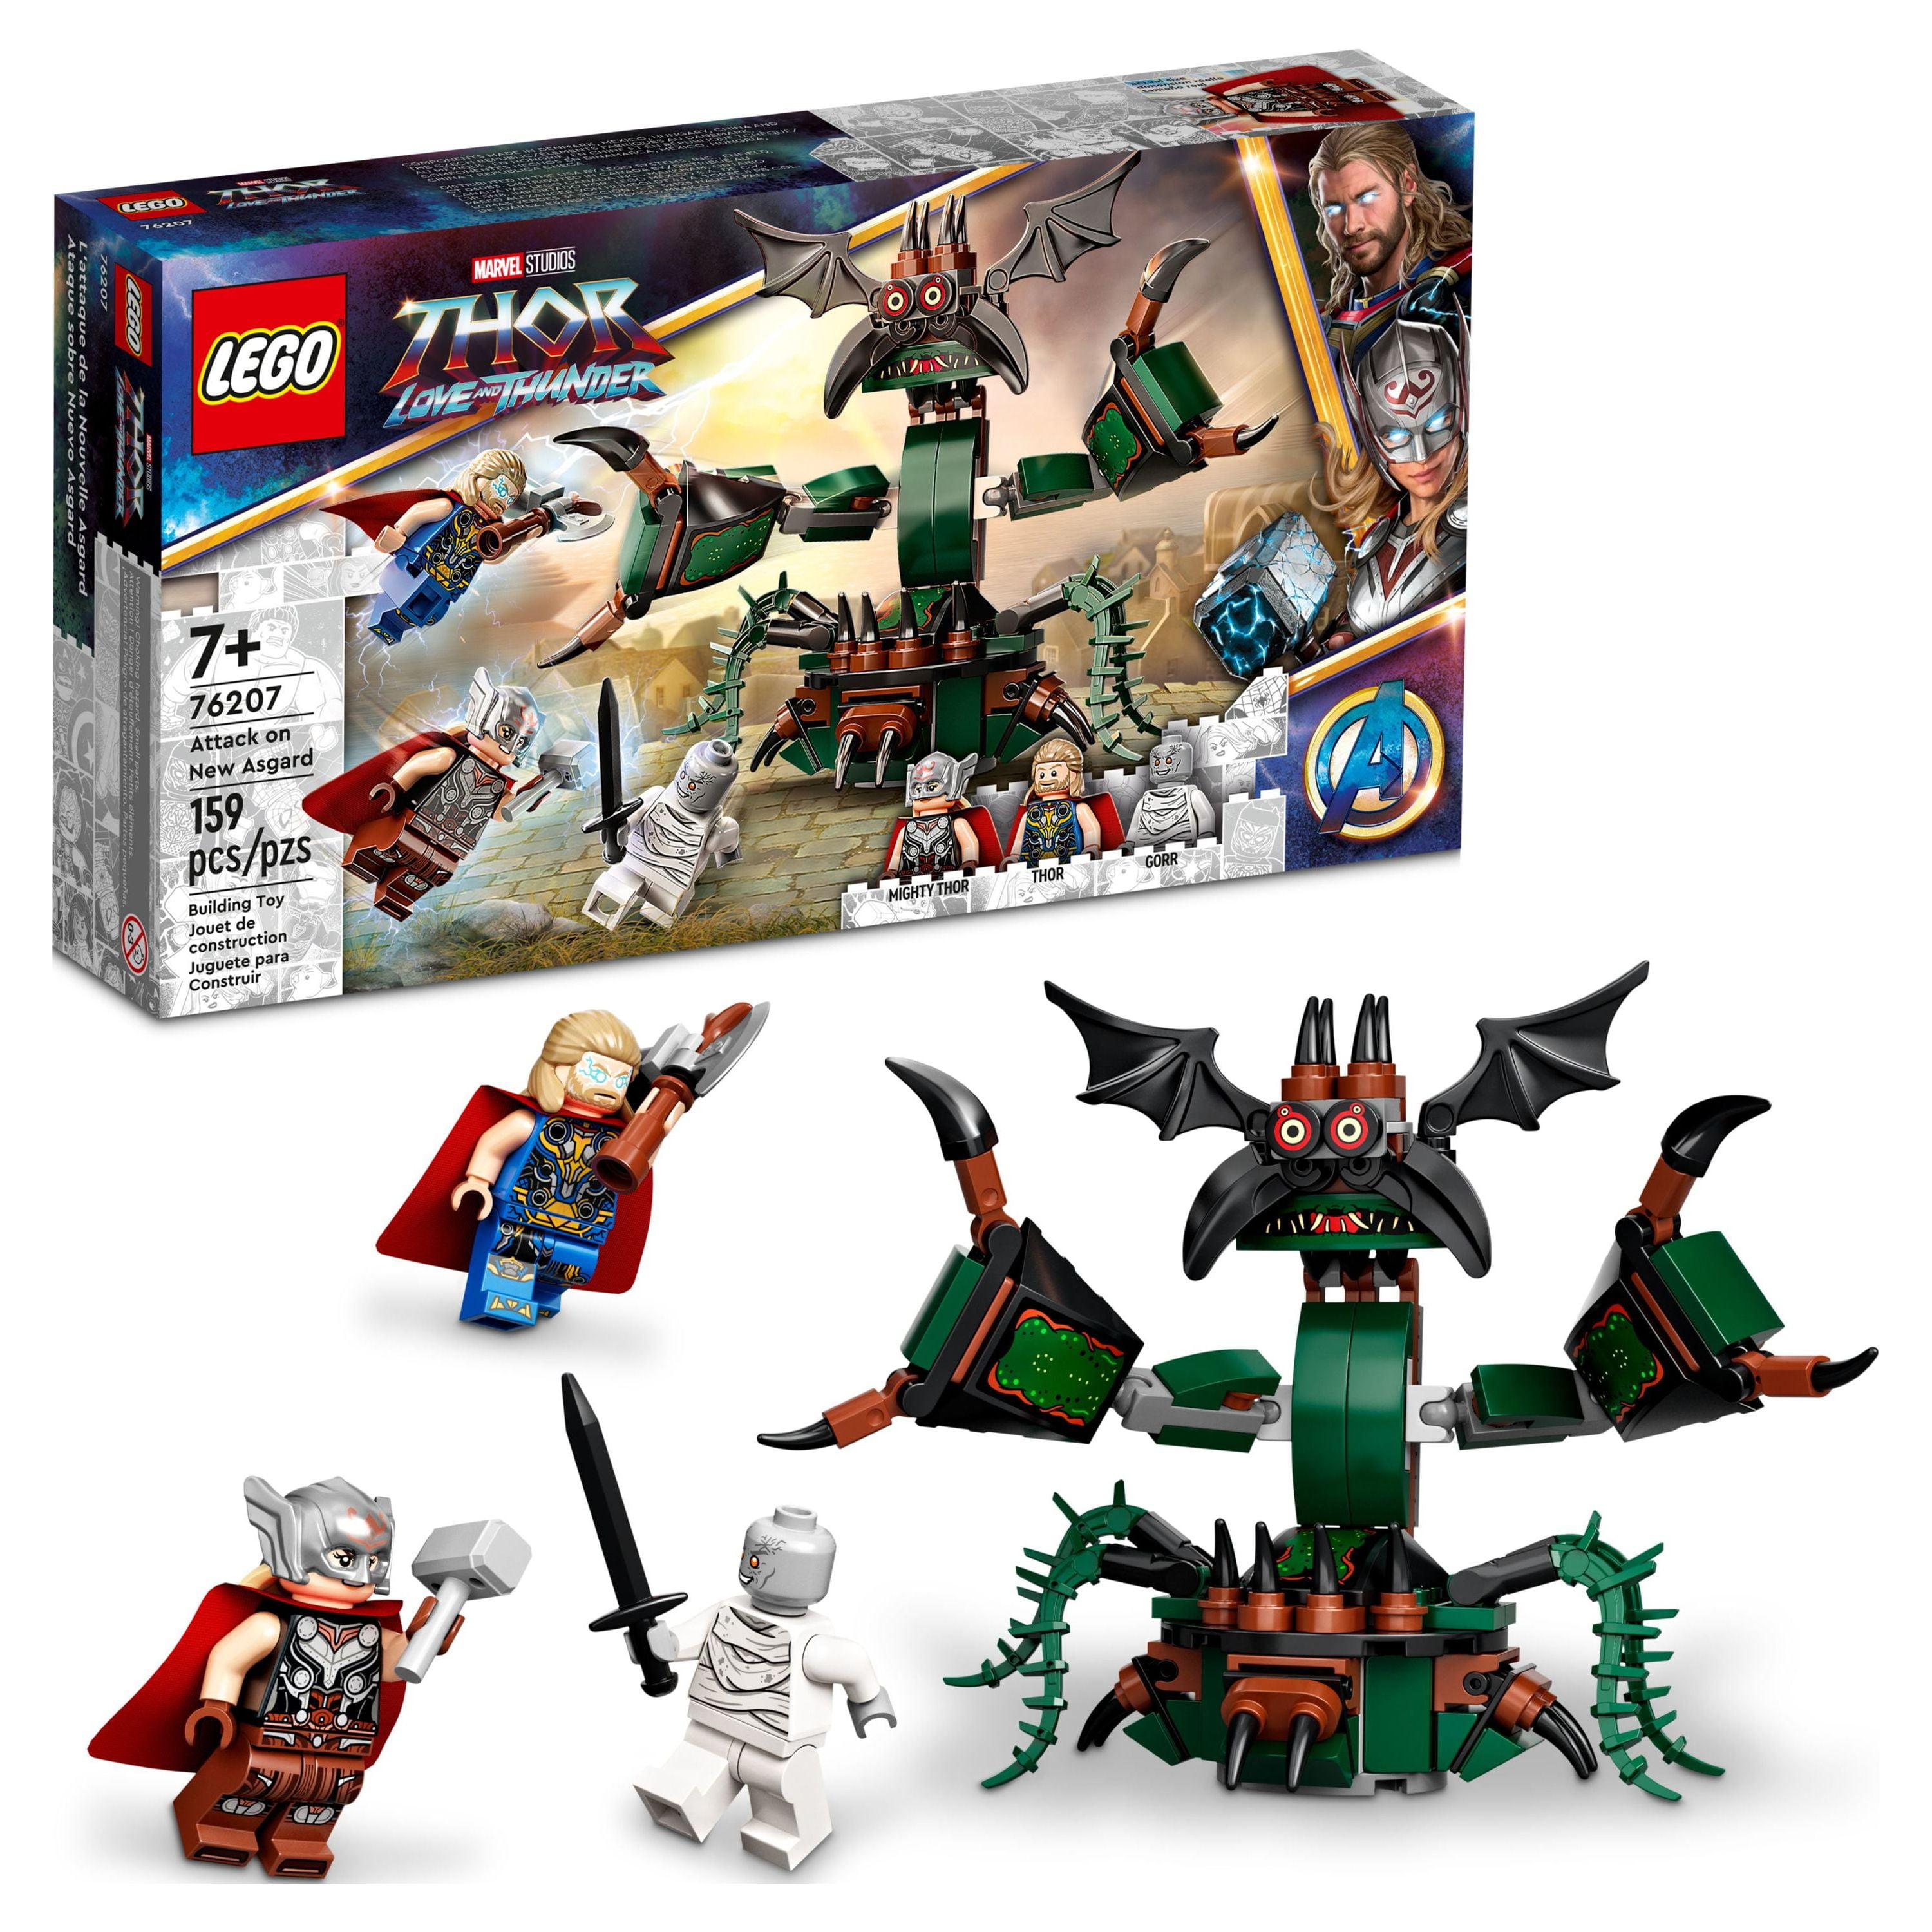 LEGO Harry Potter: Attack on The Burrow (75980) for sale online